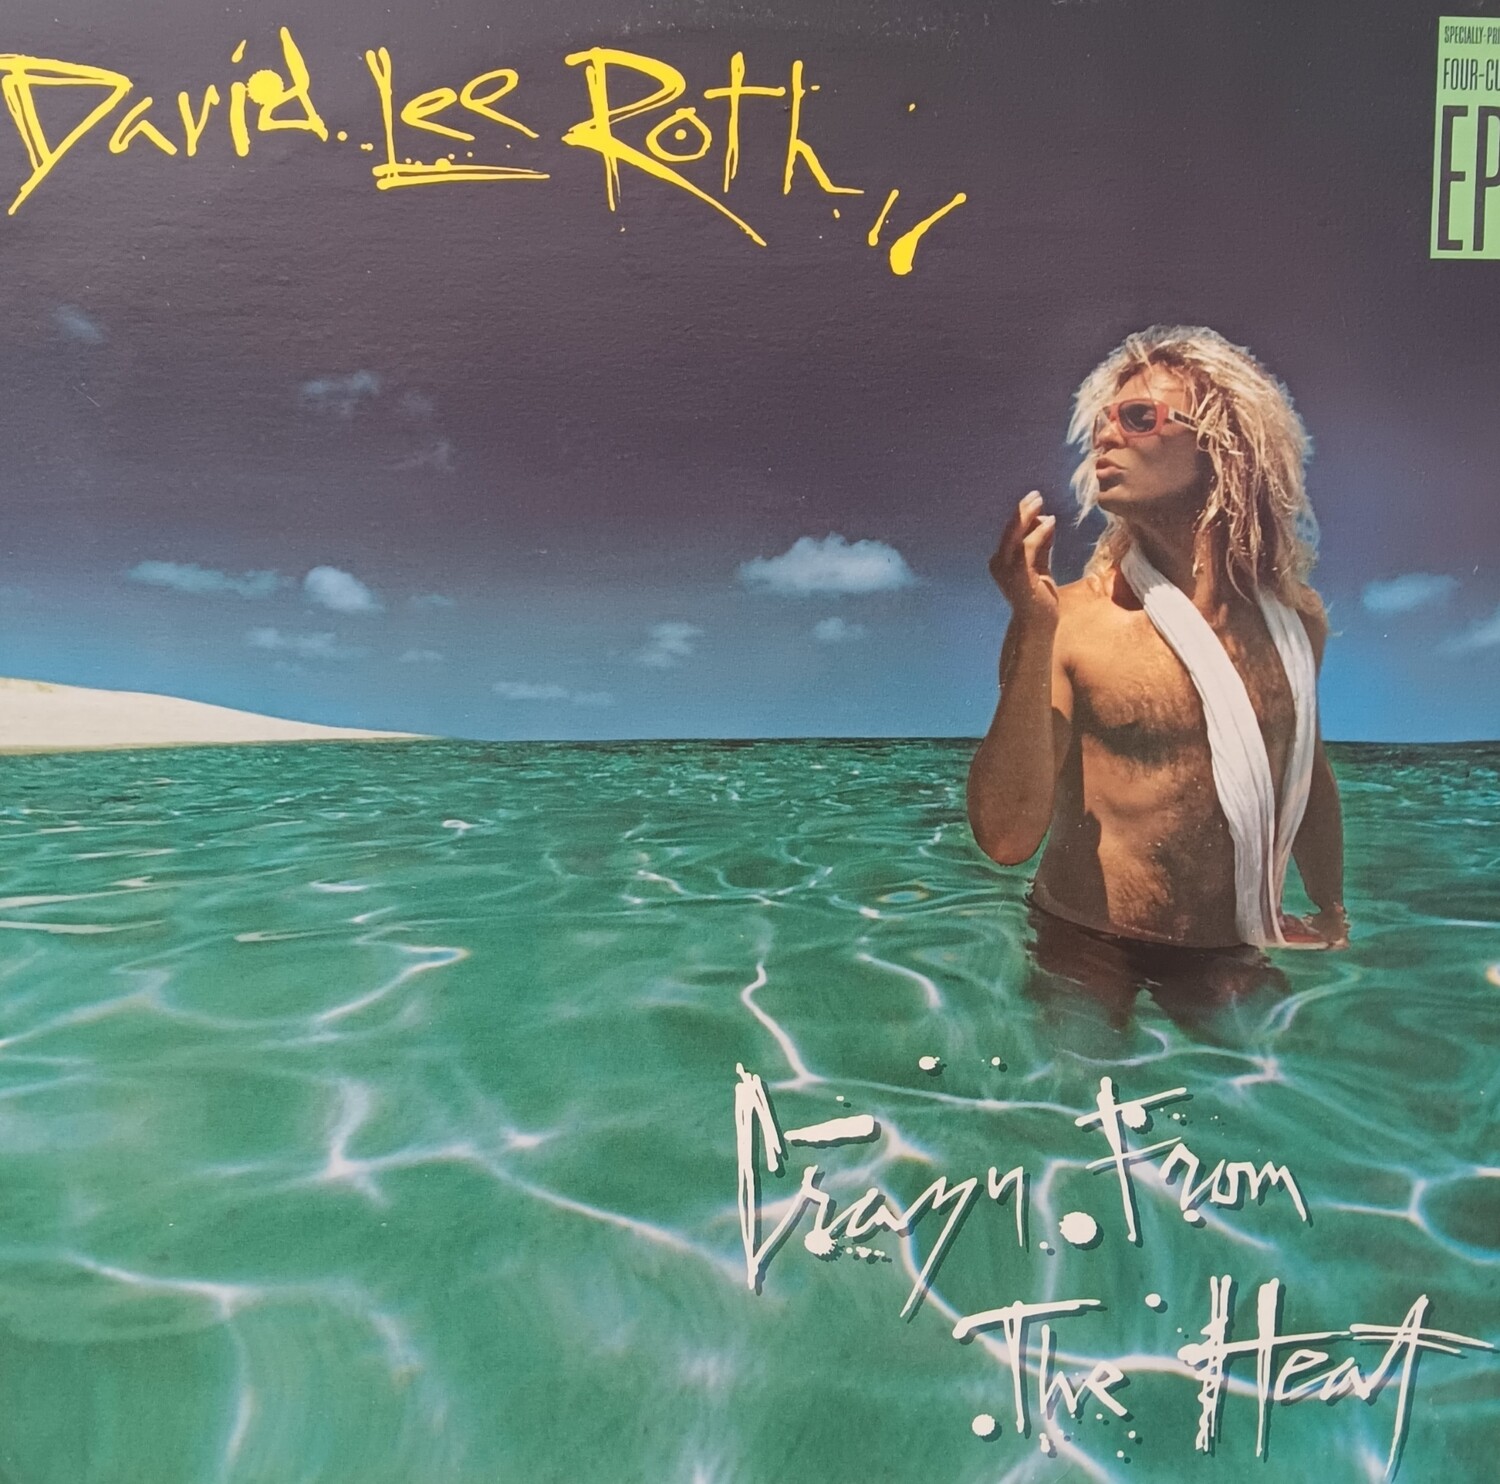 DAVID LEE ROTH - Crazy from the heat